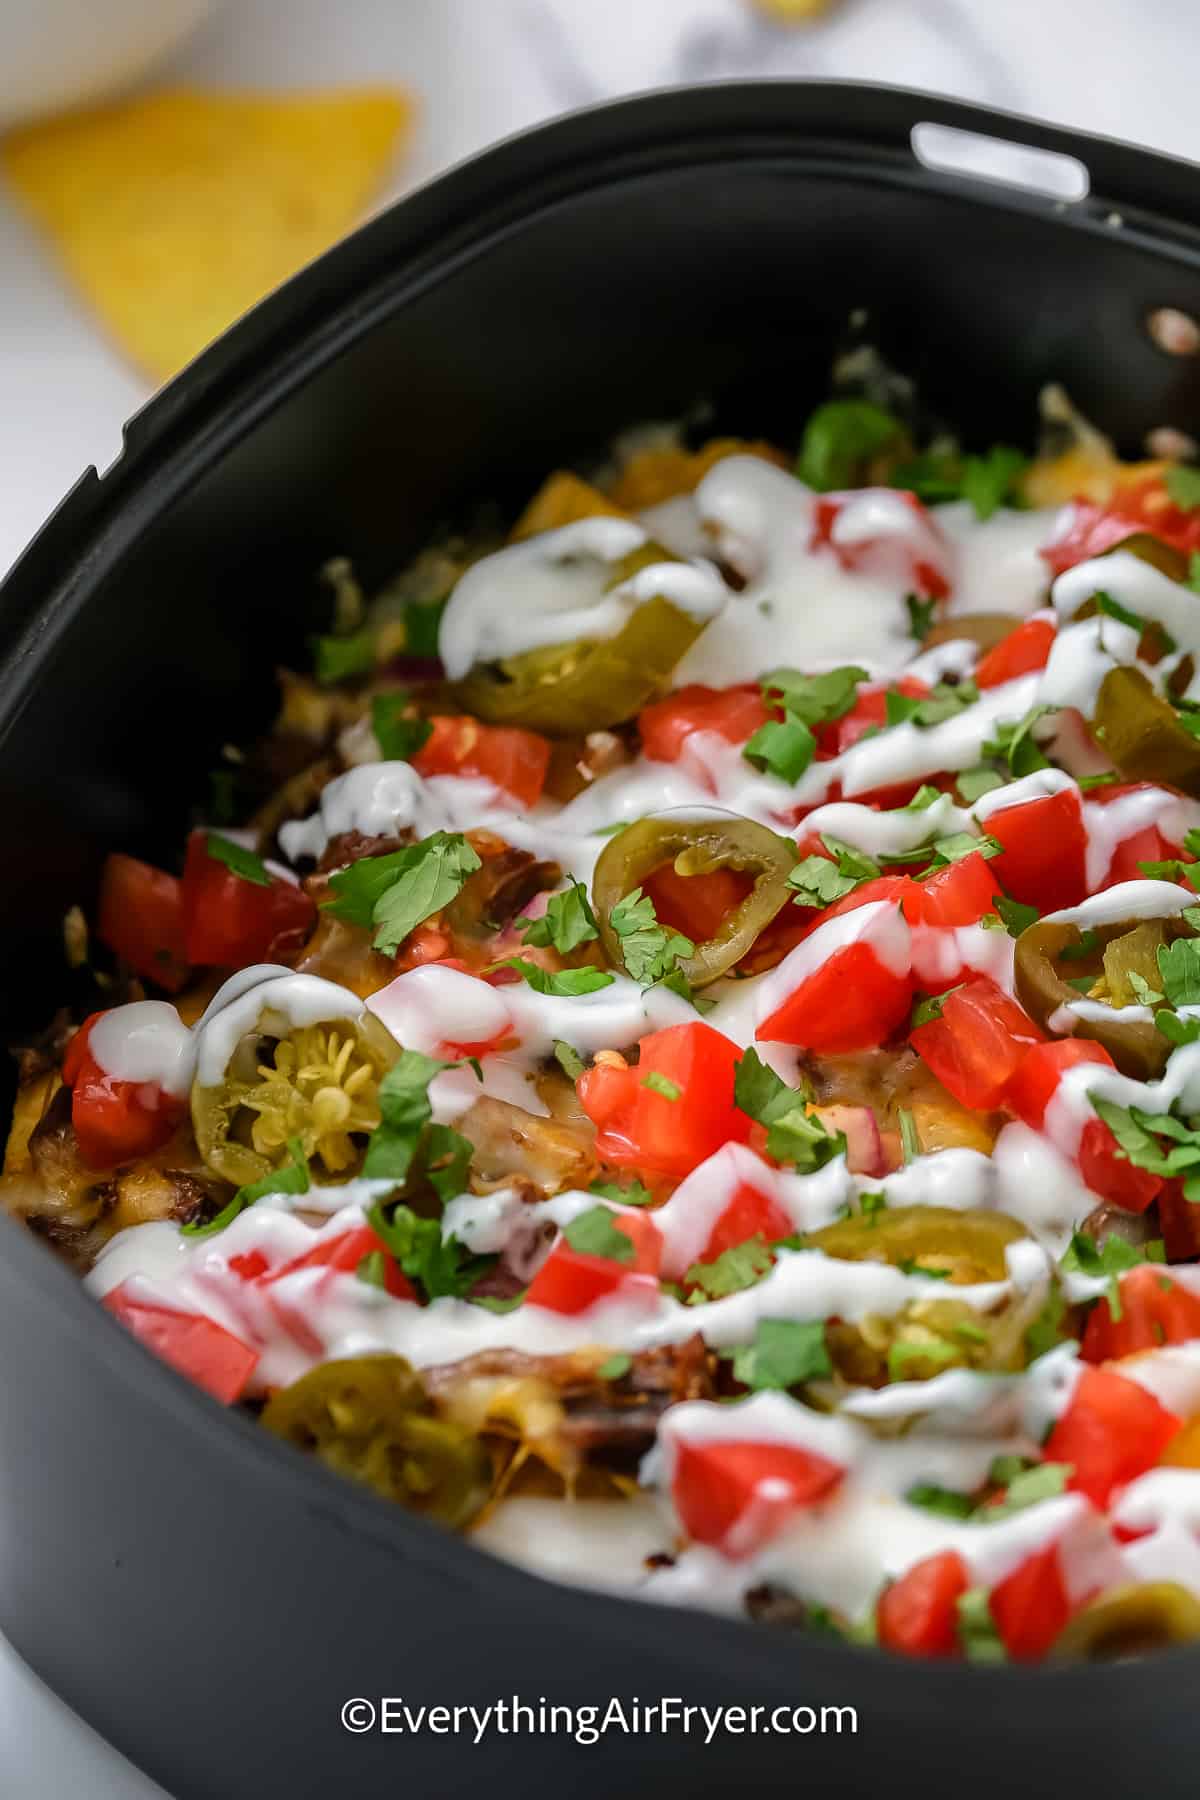 nachos layered with cheese, brisket, jalapeños, and tomatoes in an air fryer tray